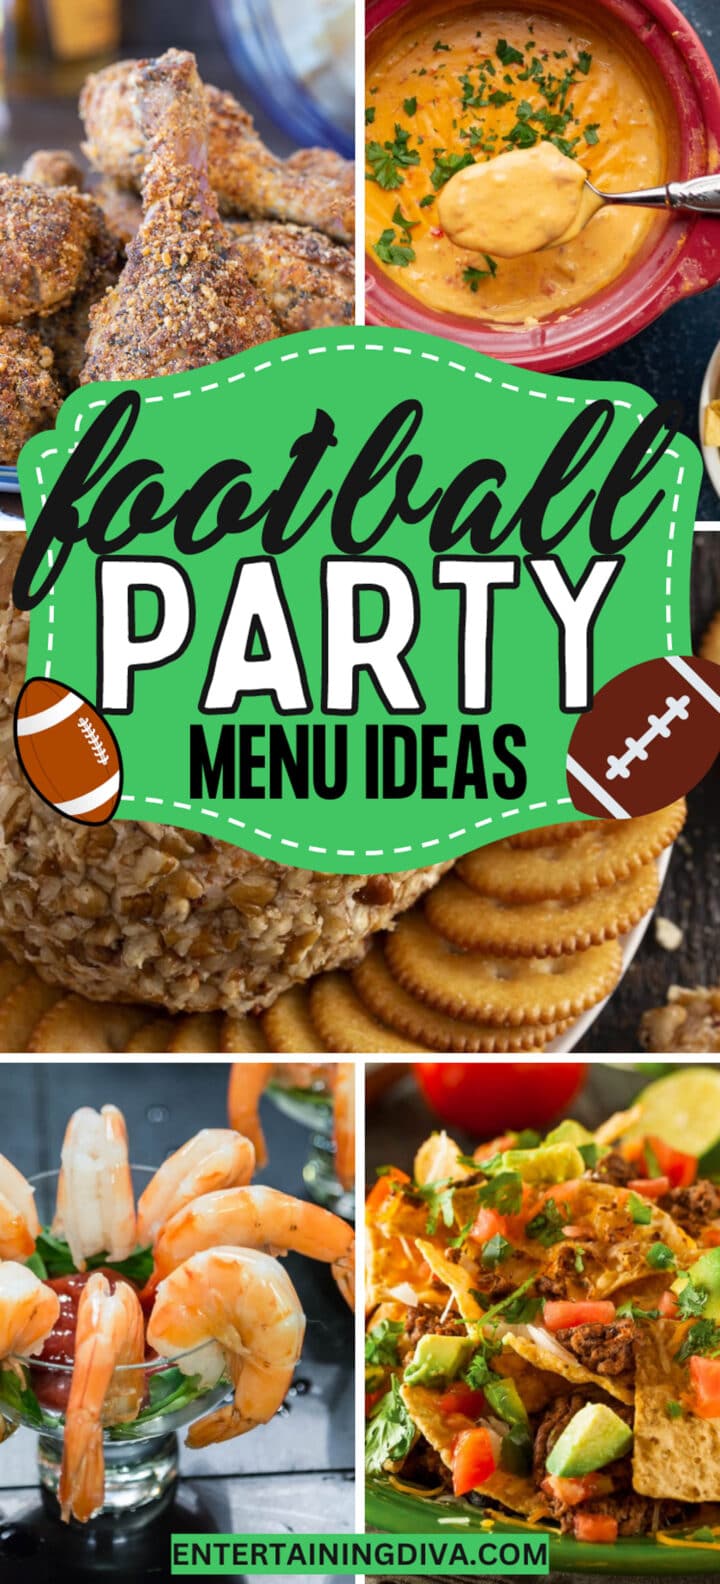 The Best Football Party Menu